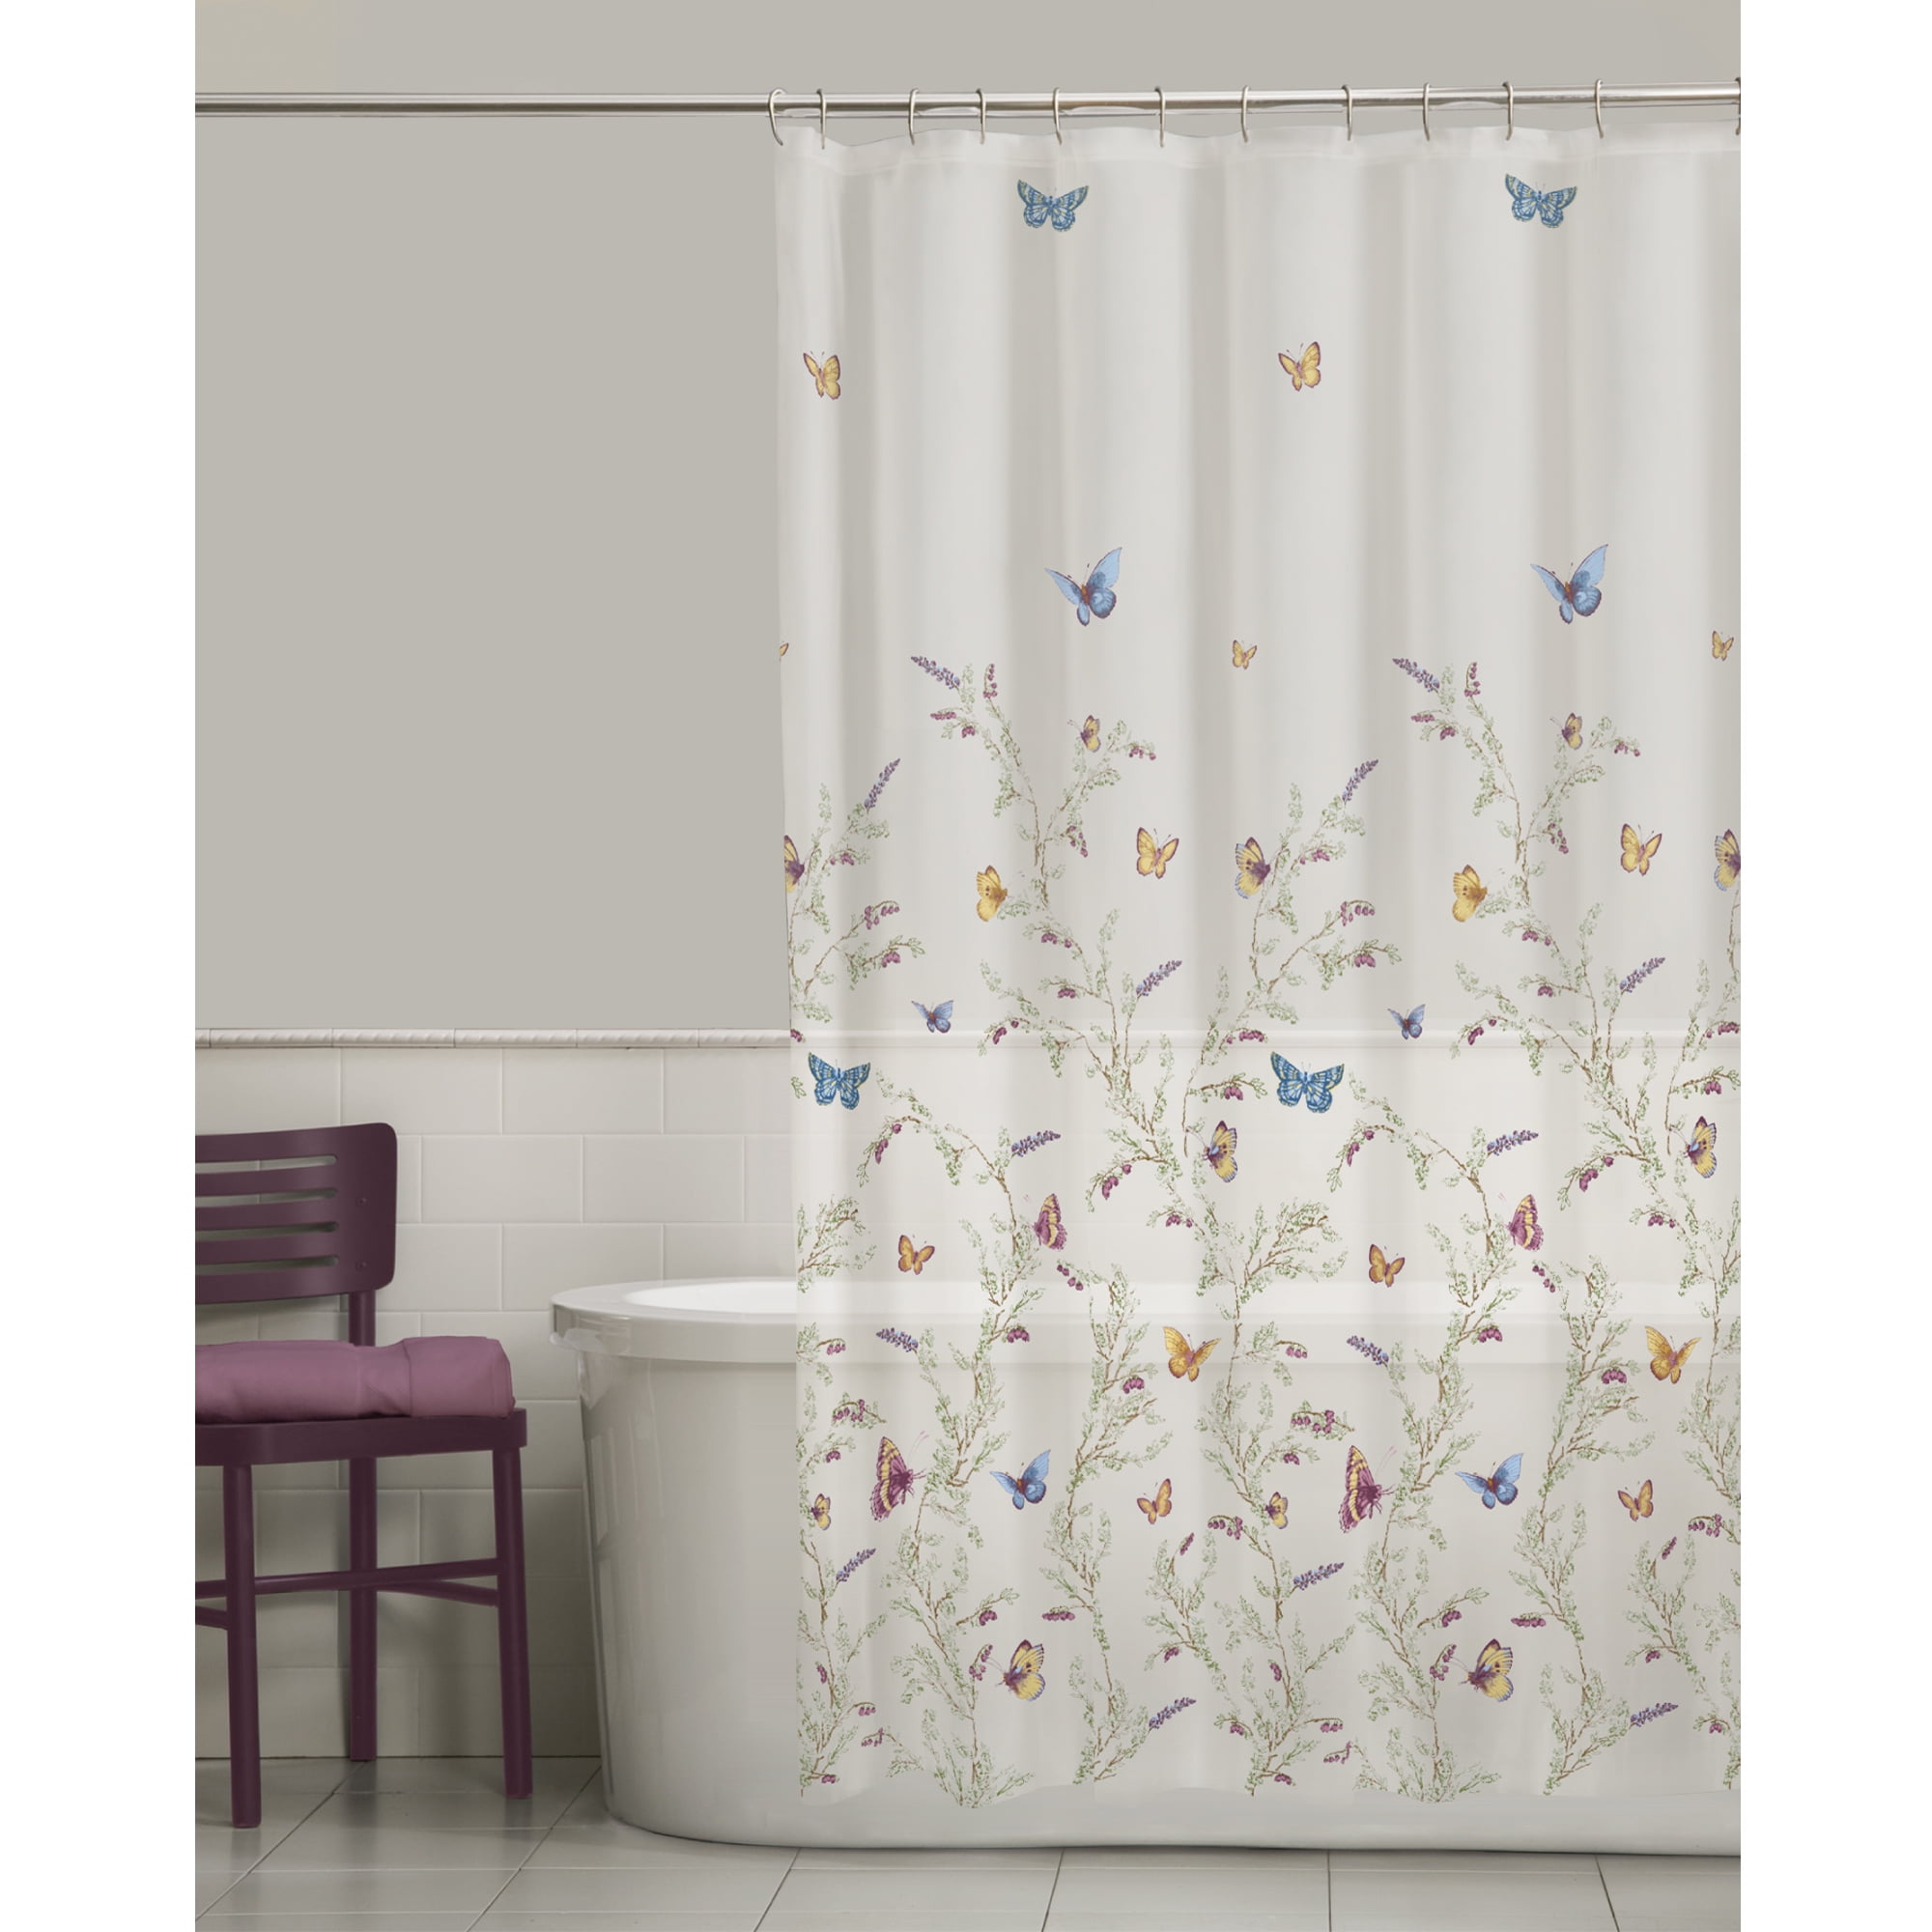 Details about   Vintage Rose Butterfly Shower Curtain Bathroom Decor Fabric 12hooks 71in 